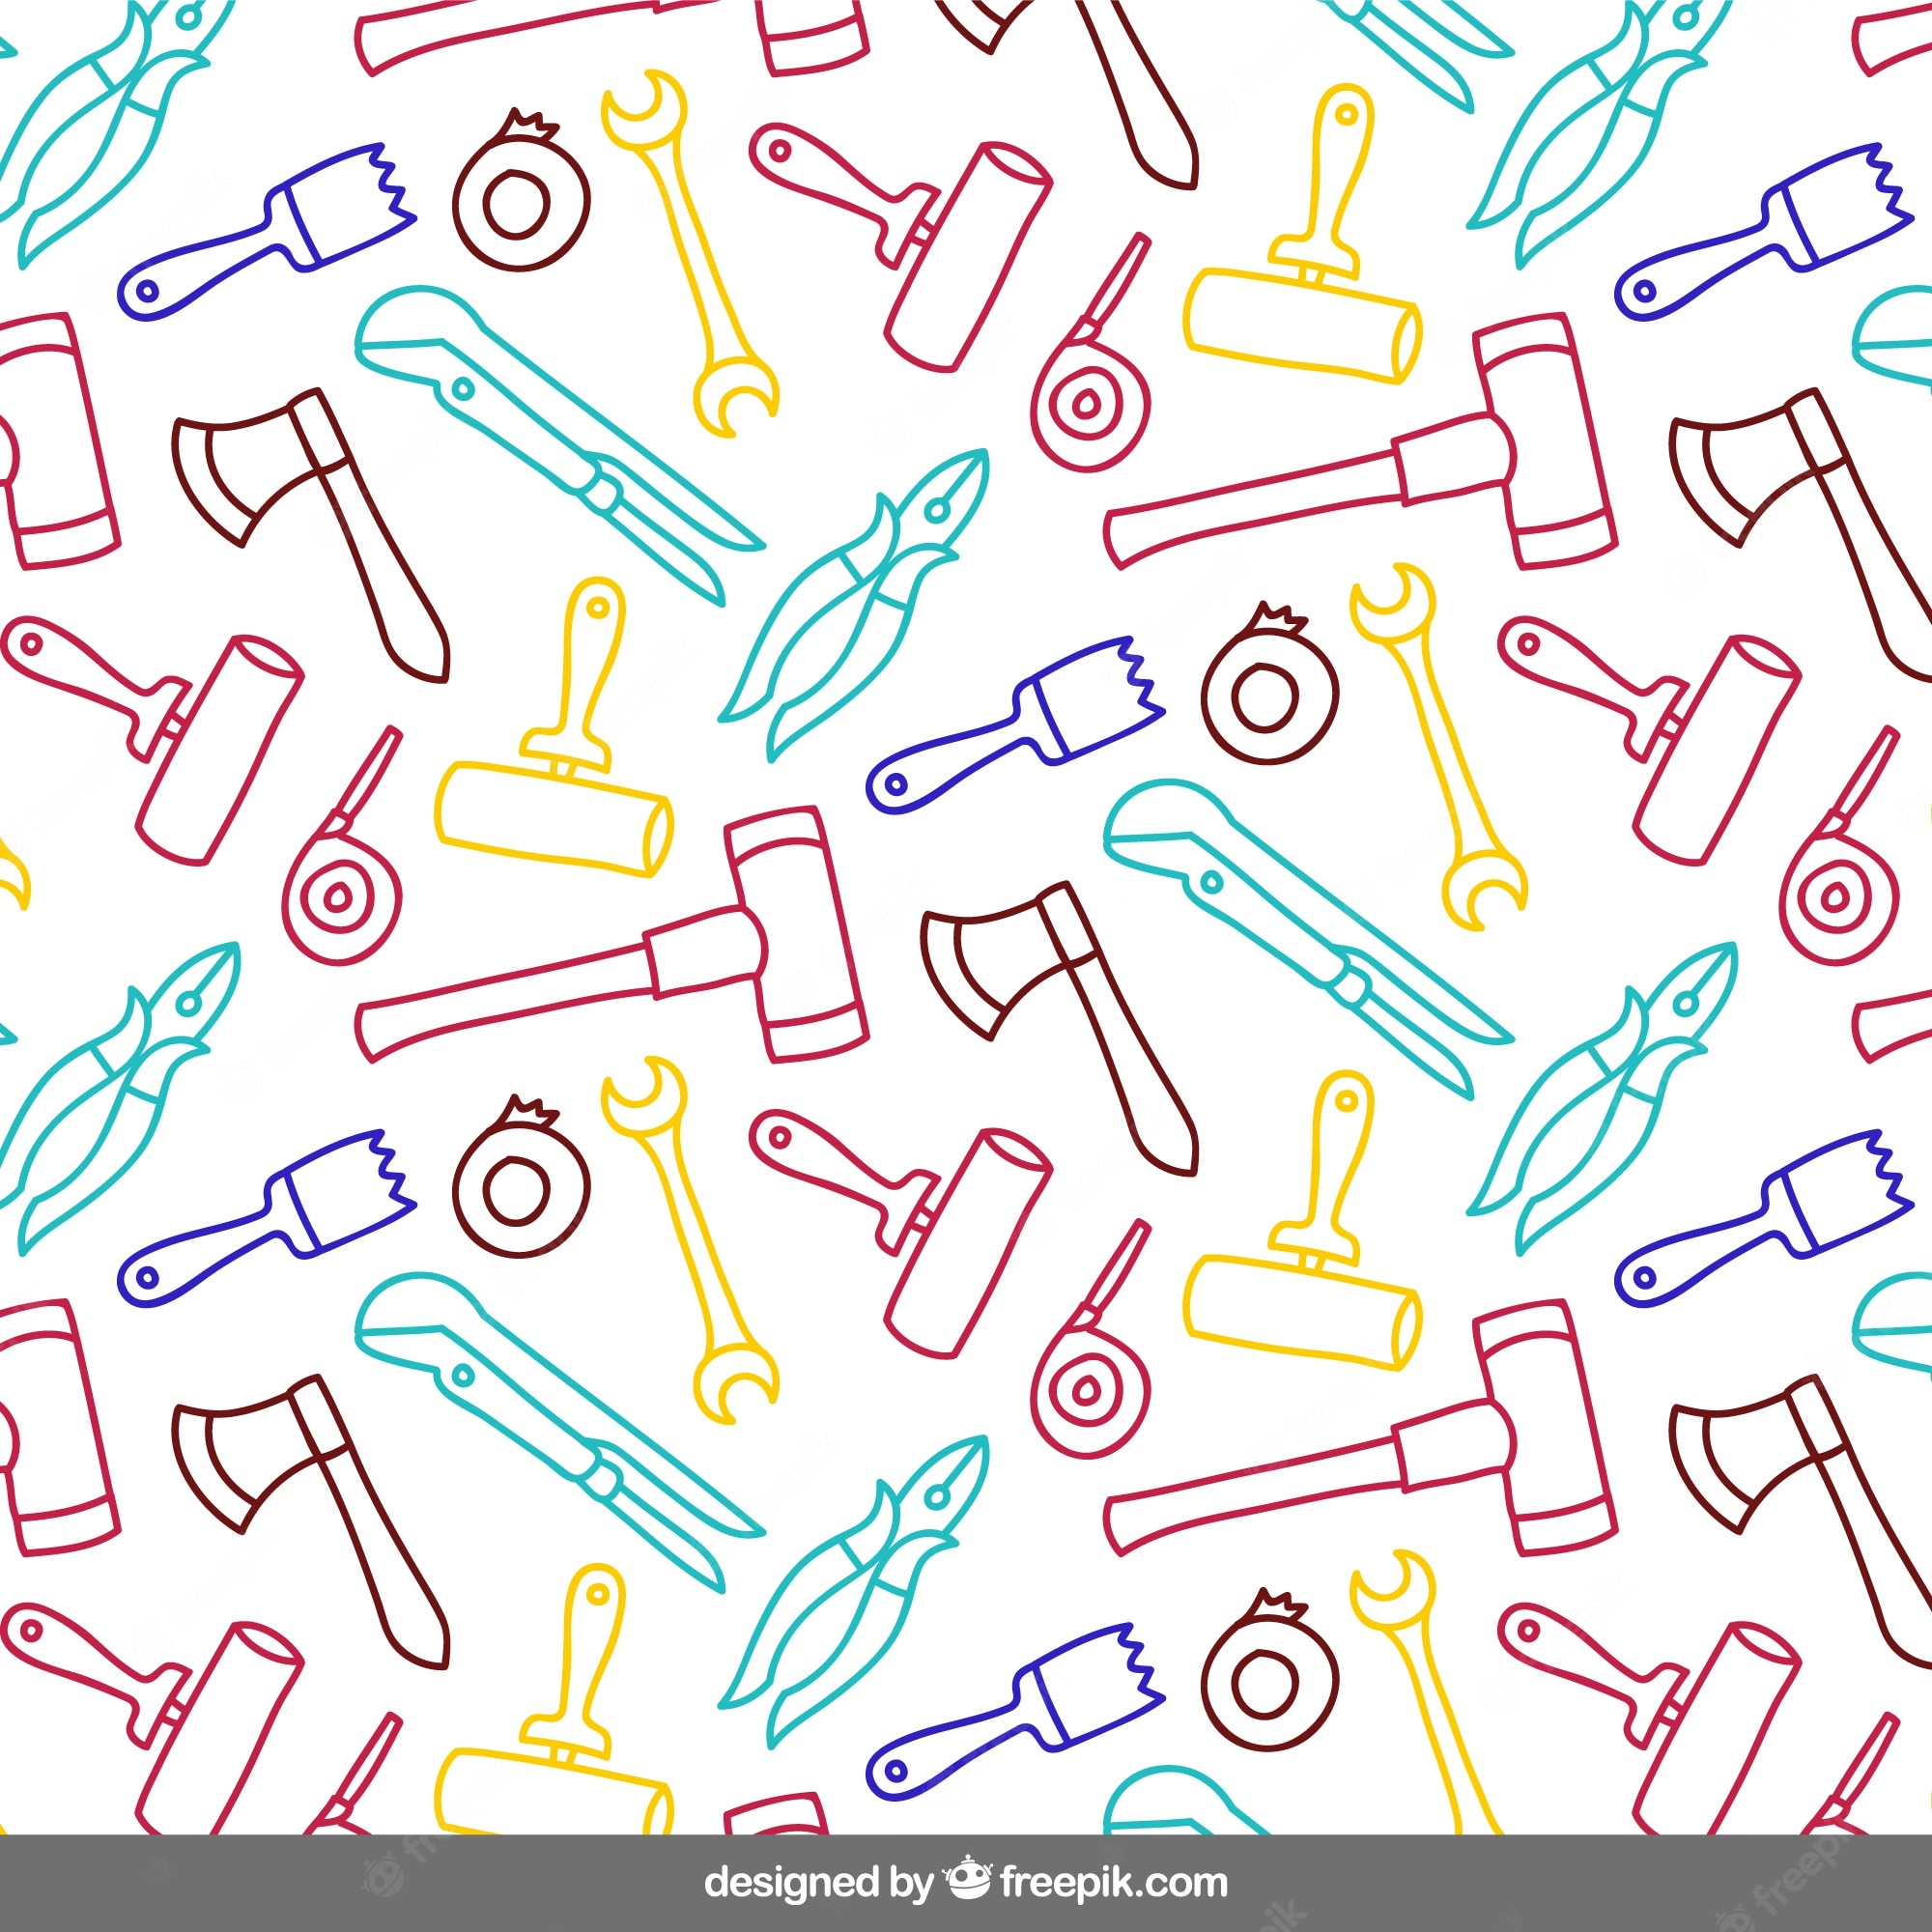 Tools Backgrounds